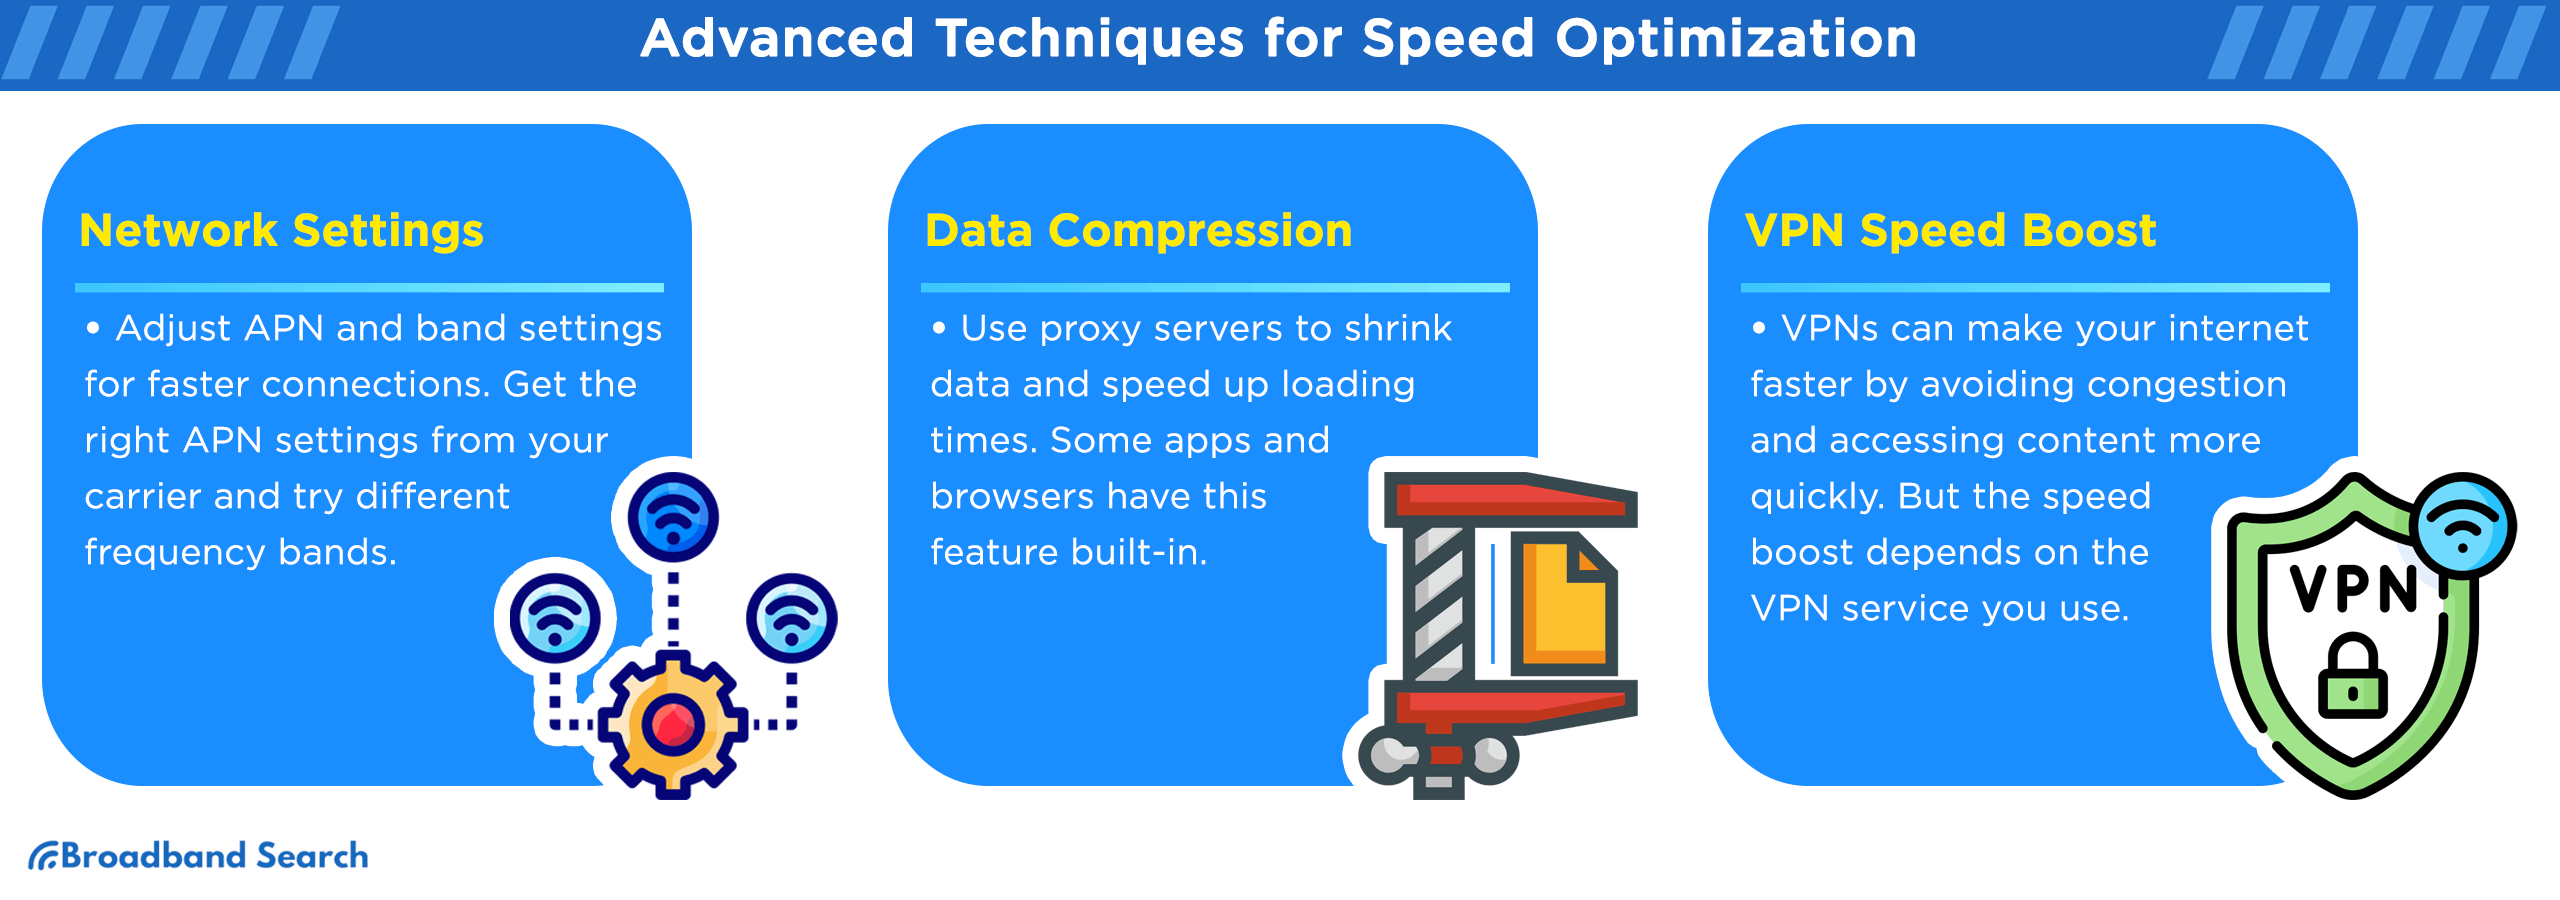 Advanced techniques for speed optimization